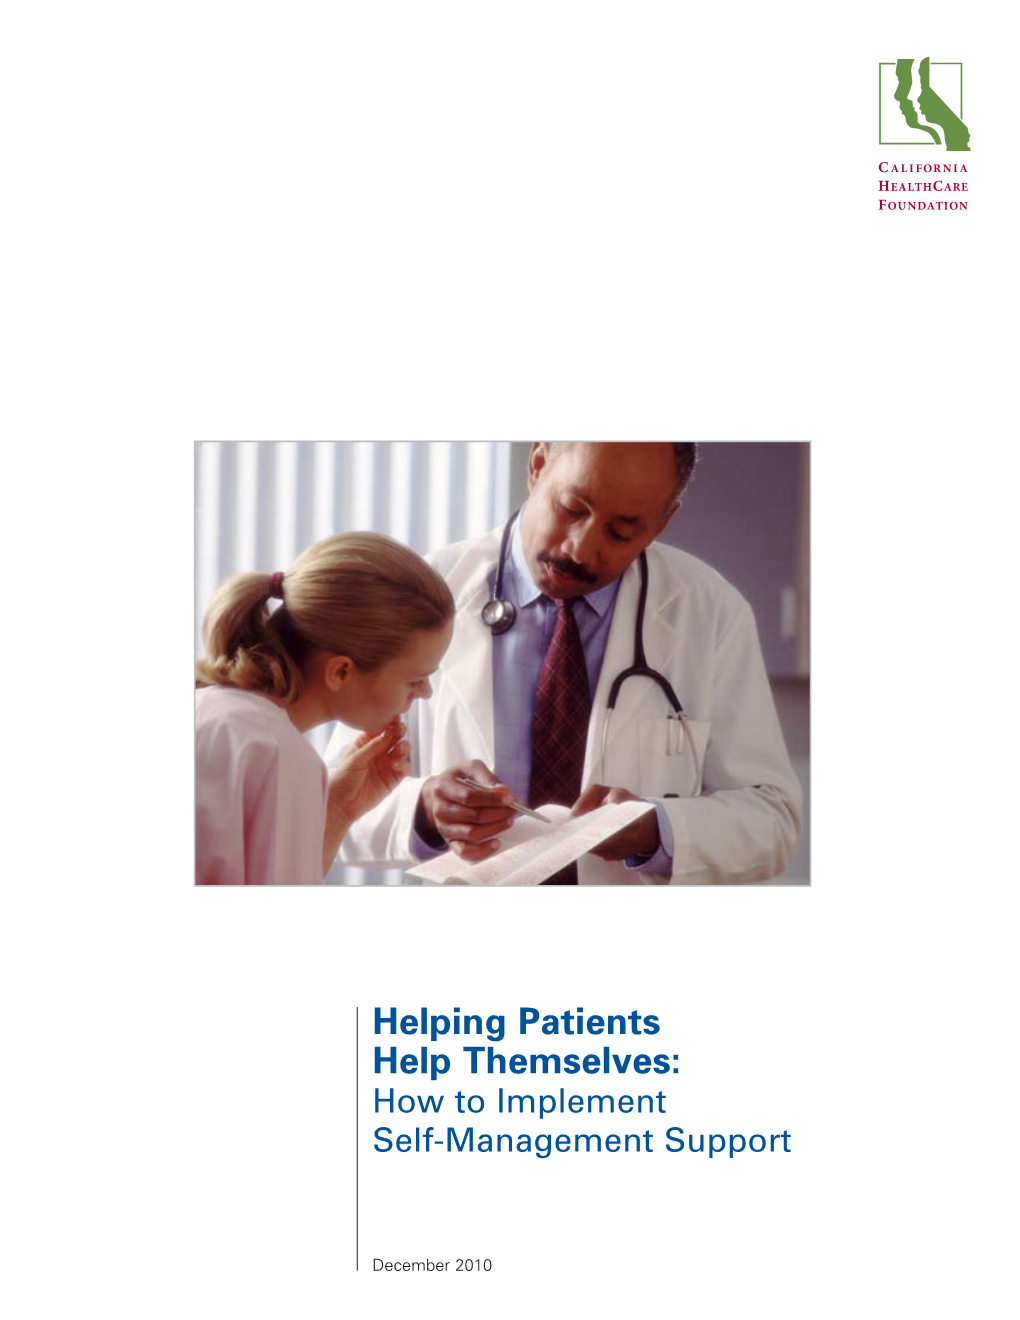 Helping Patients Help Themselves: How to Implement Self-Management Support